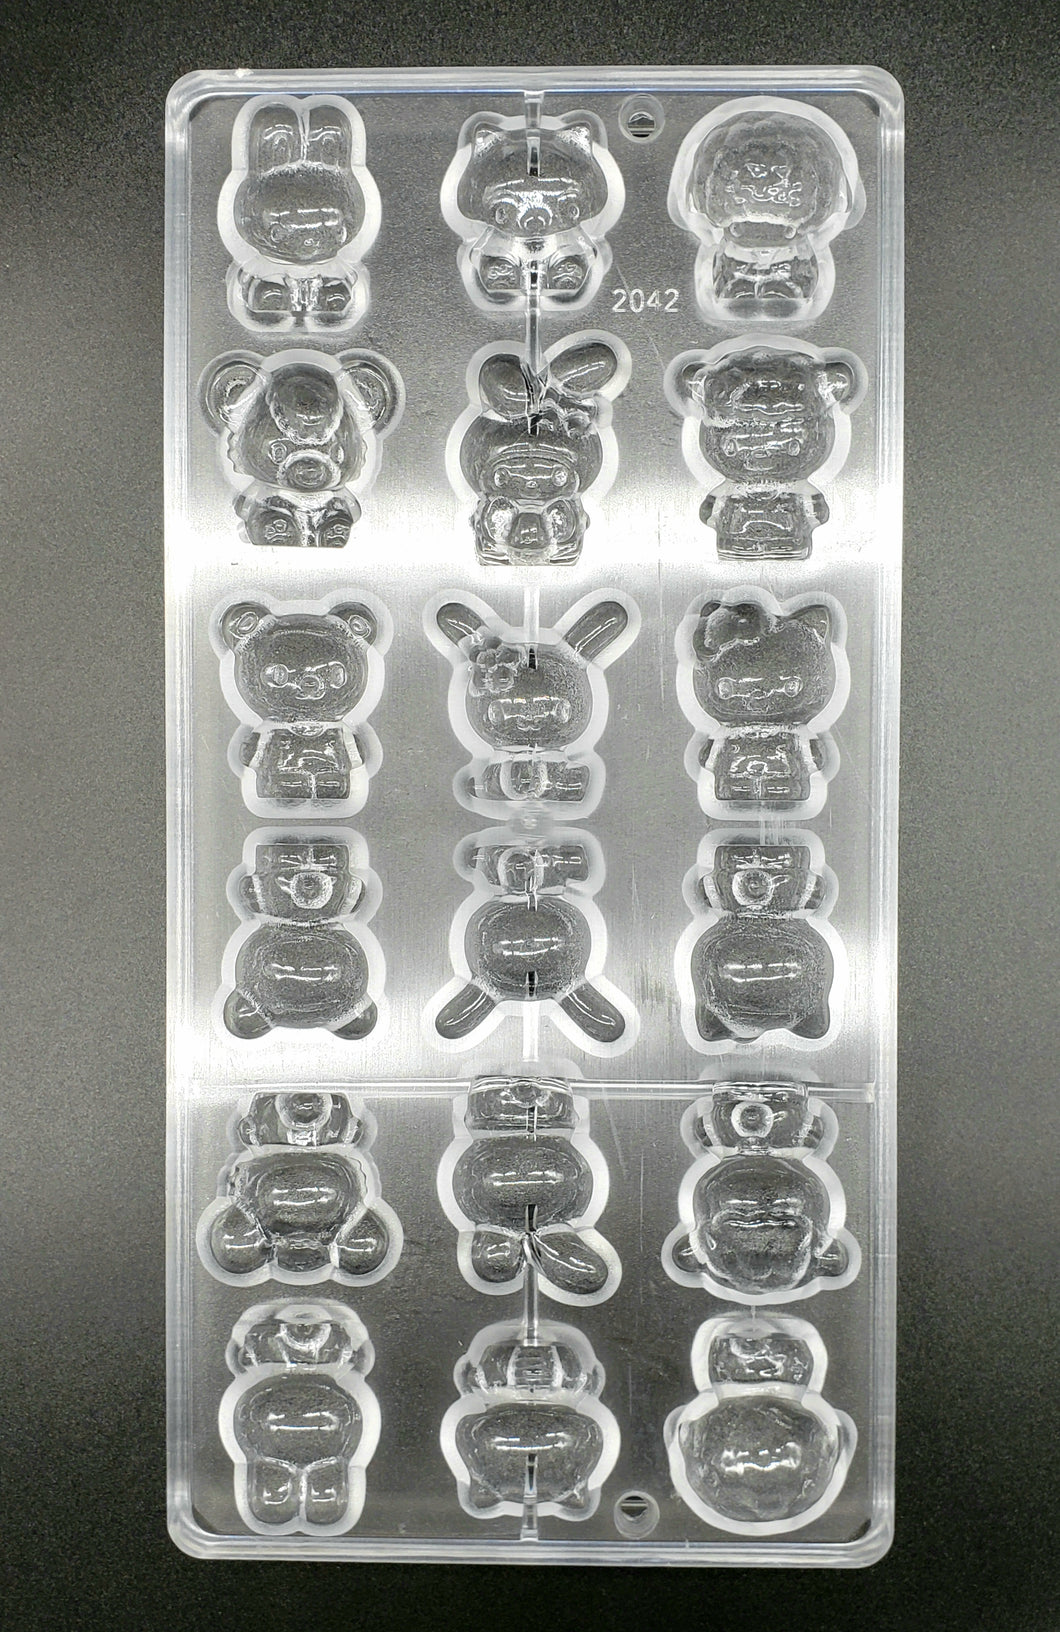 POLYCARBONATE CHOCOLATE MOLD HELLO KITTY & FRIENDS